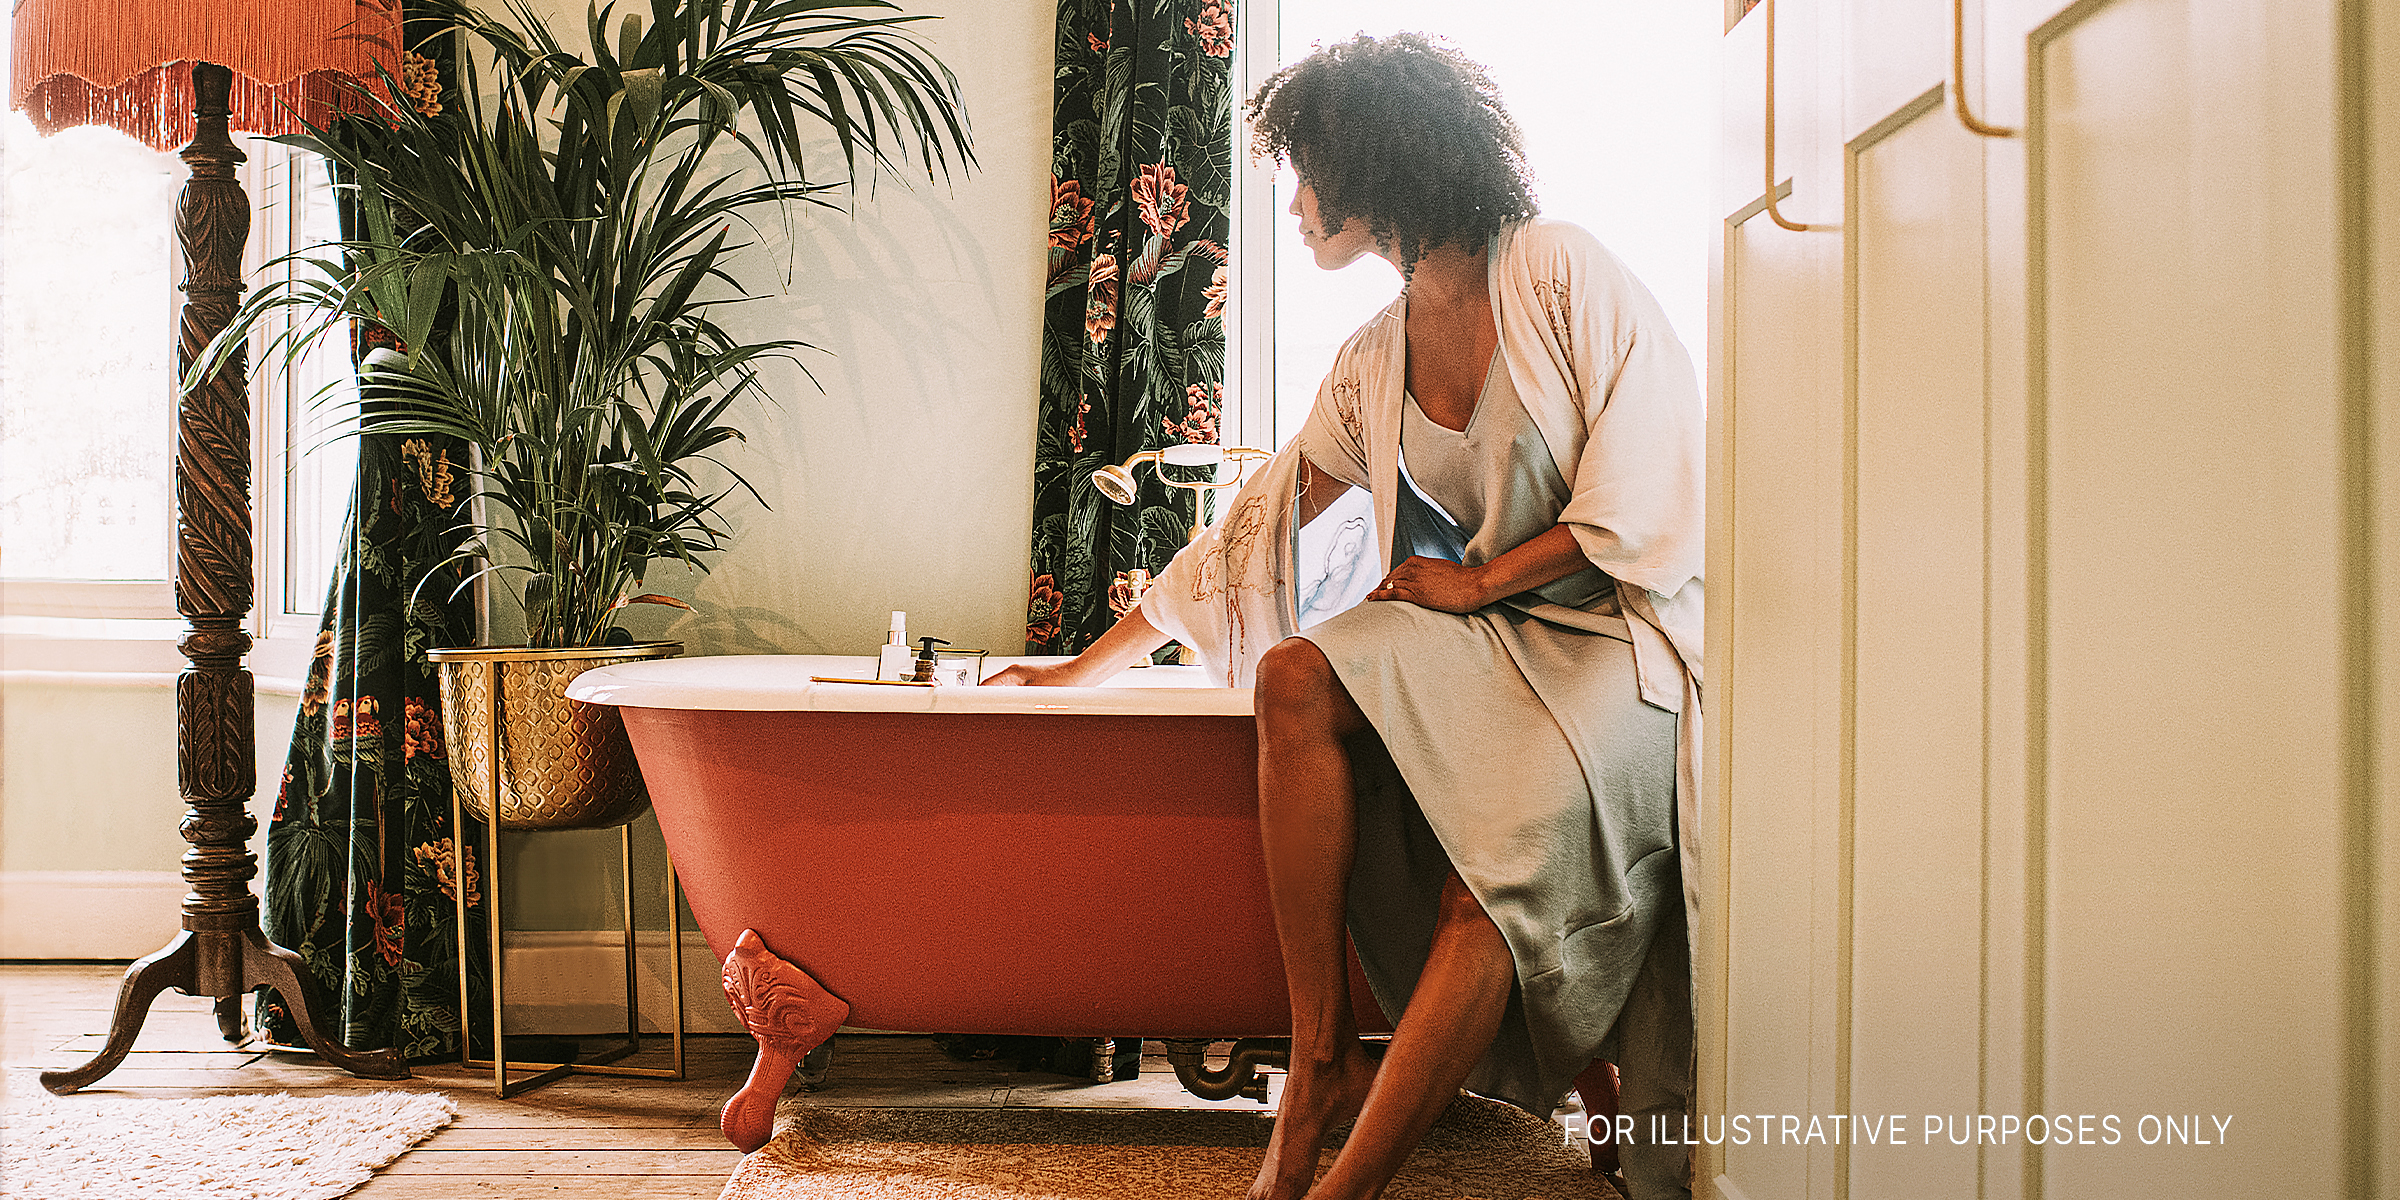 A woman perched on a bathtub | Source: Getty Images